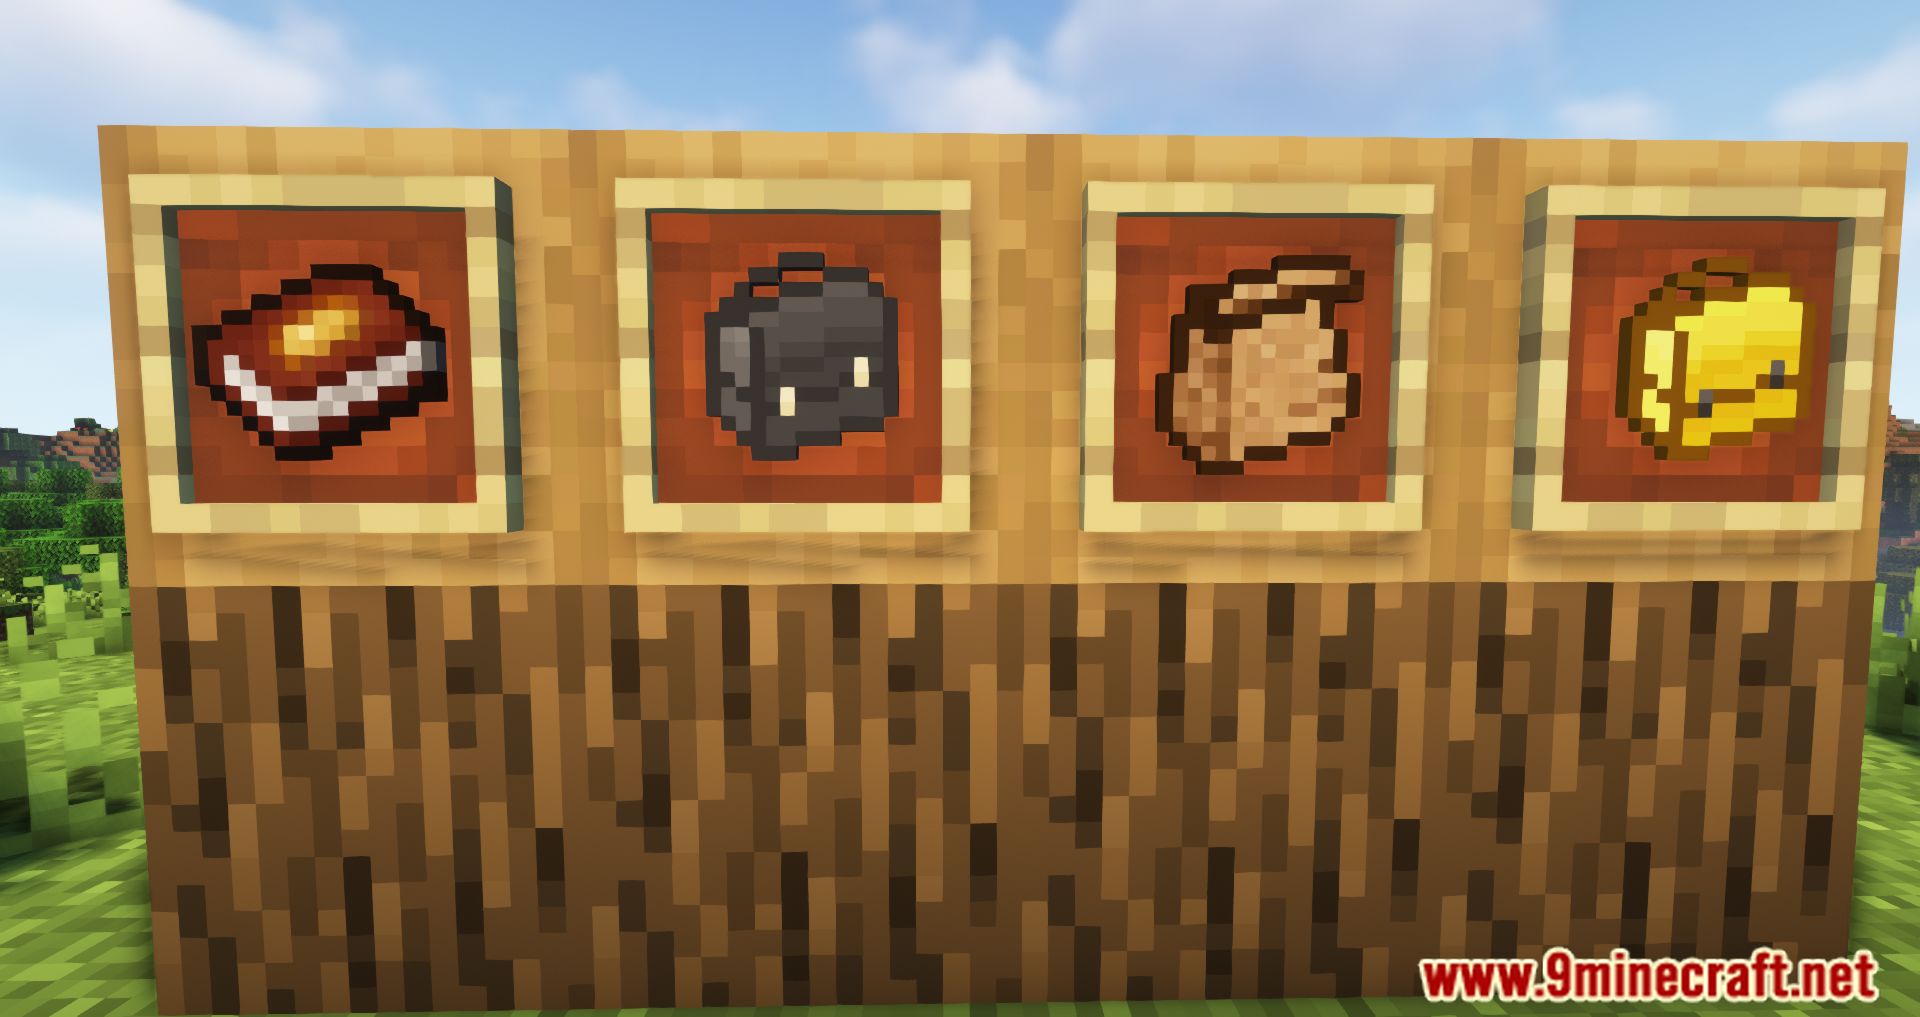 Spice of Life: Sweet Potato Edition Mod (1.19.2, 1.18.2) - Benefits Of Eating In Moderation 2